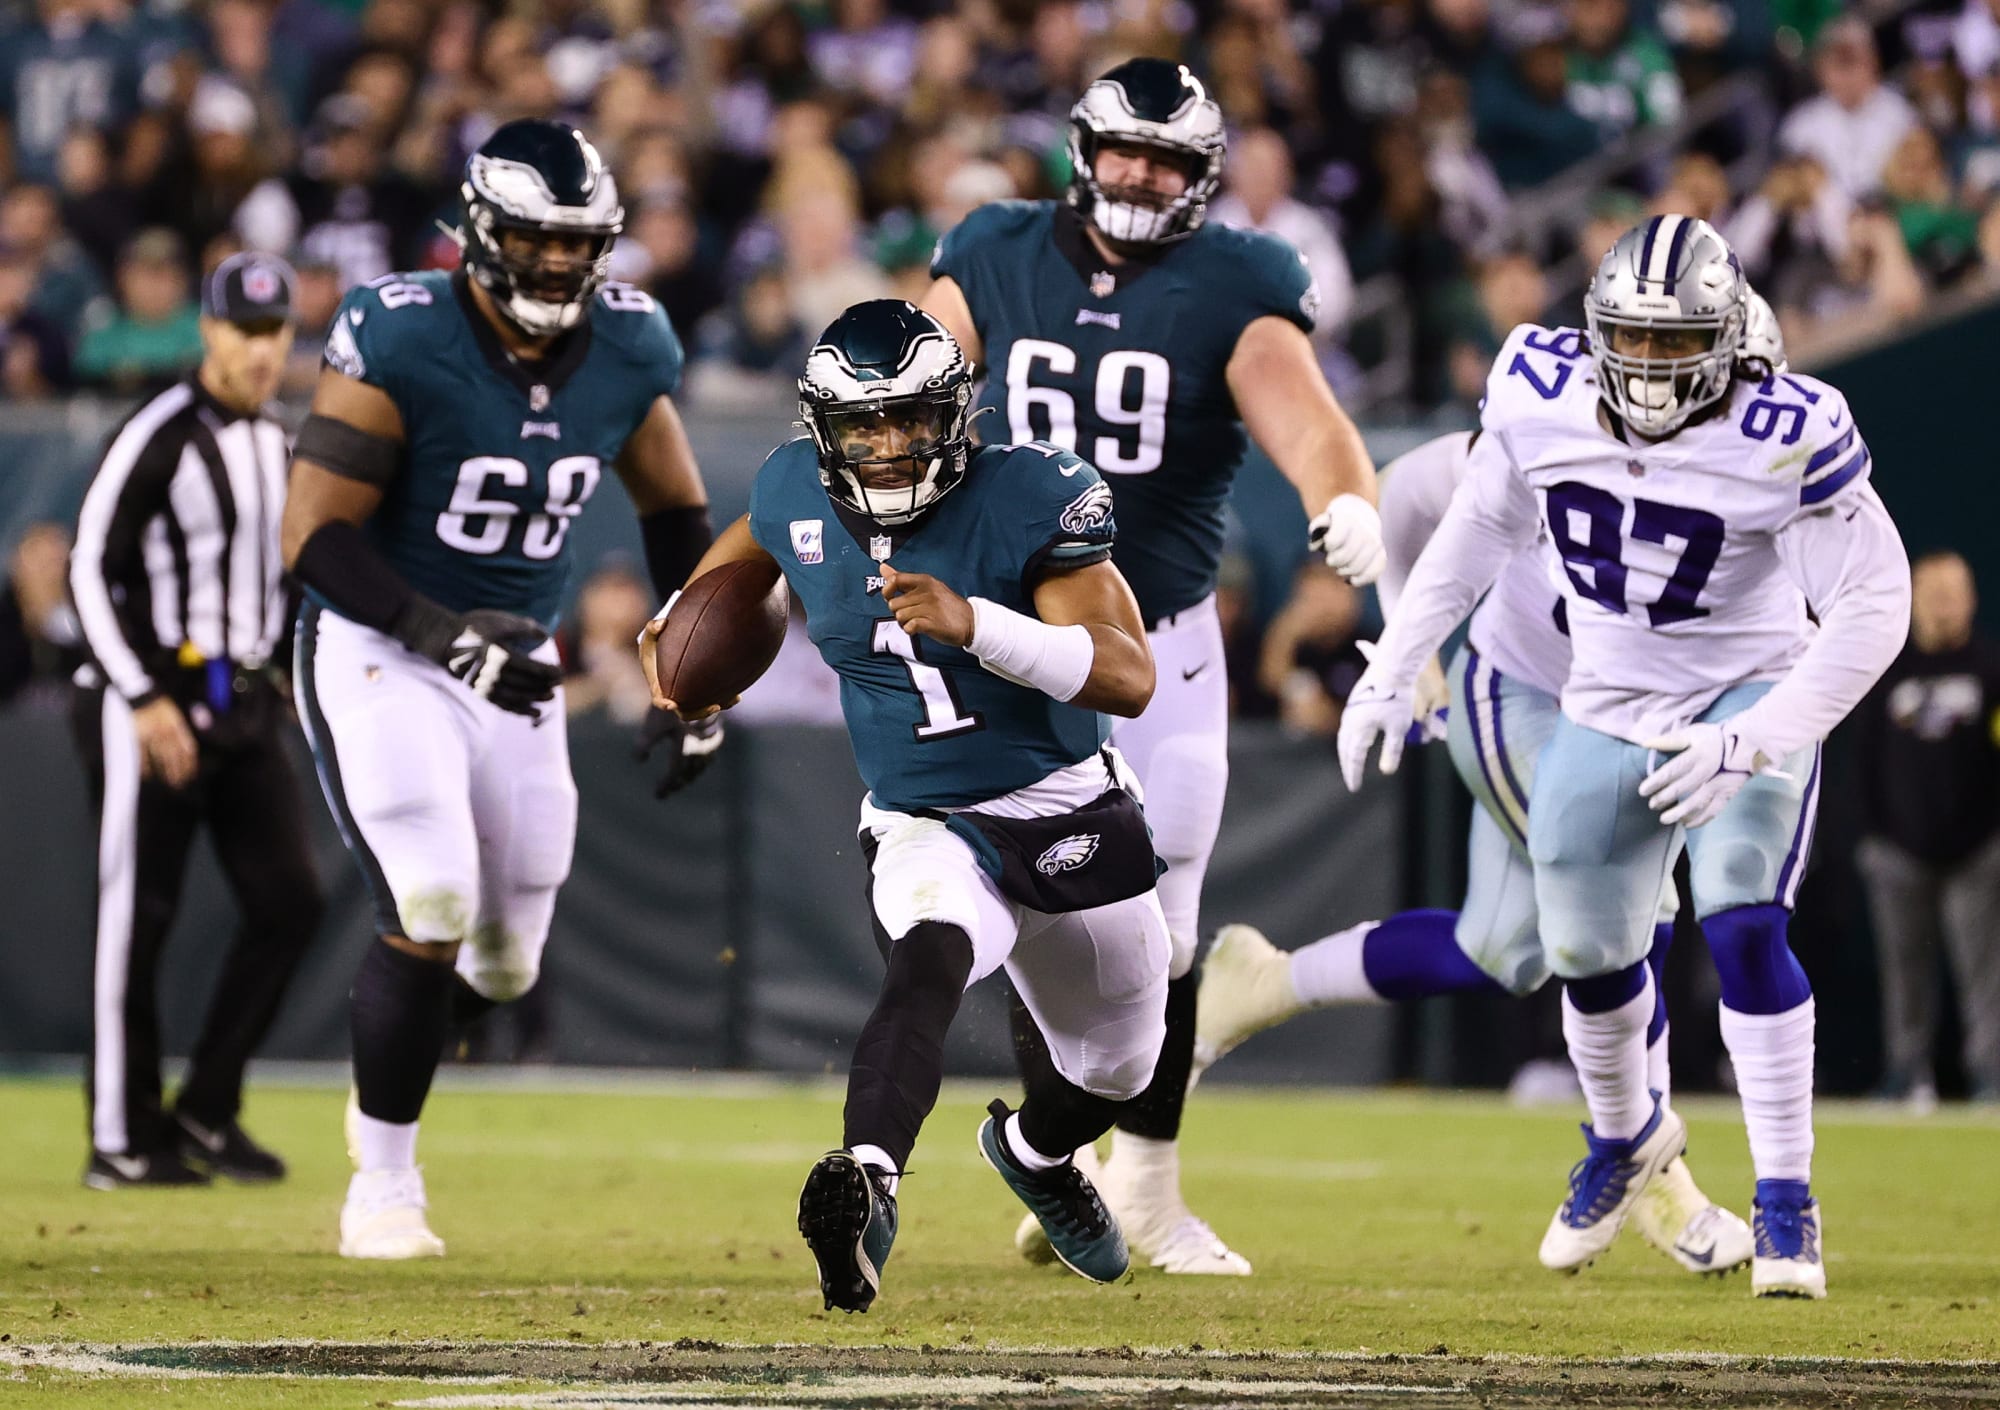 Predicting the Eagles’ first loss as NFL’s only remaining undefeated